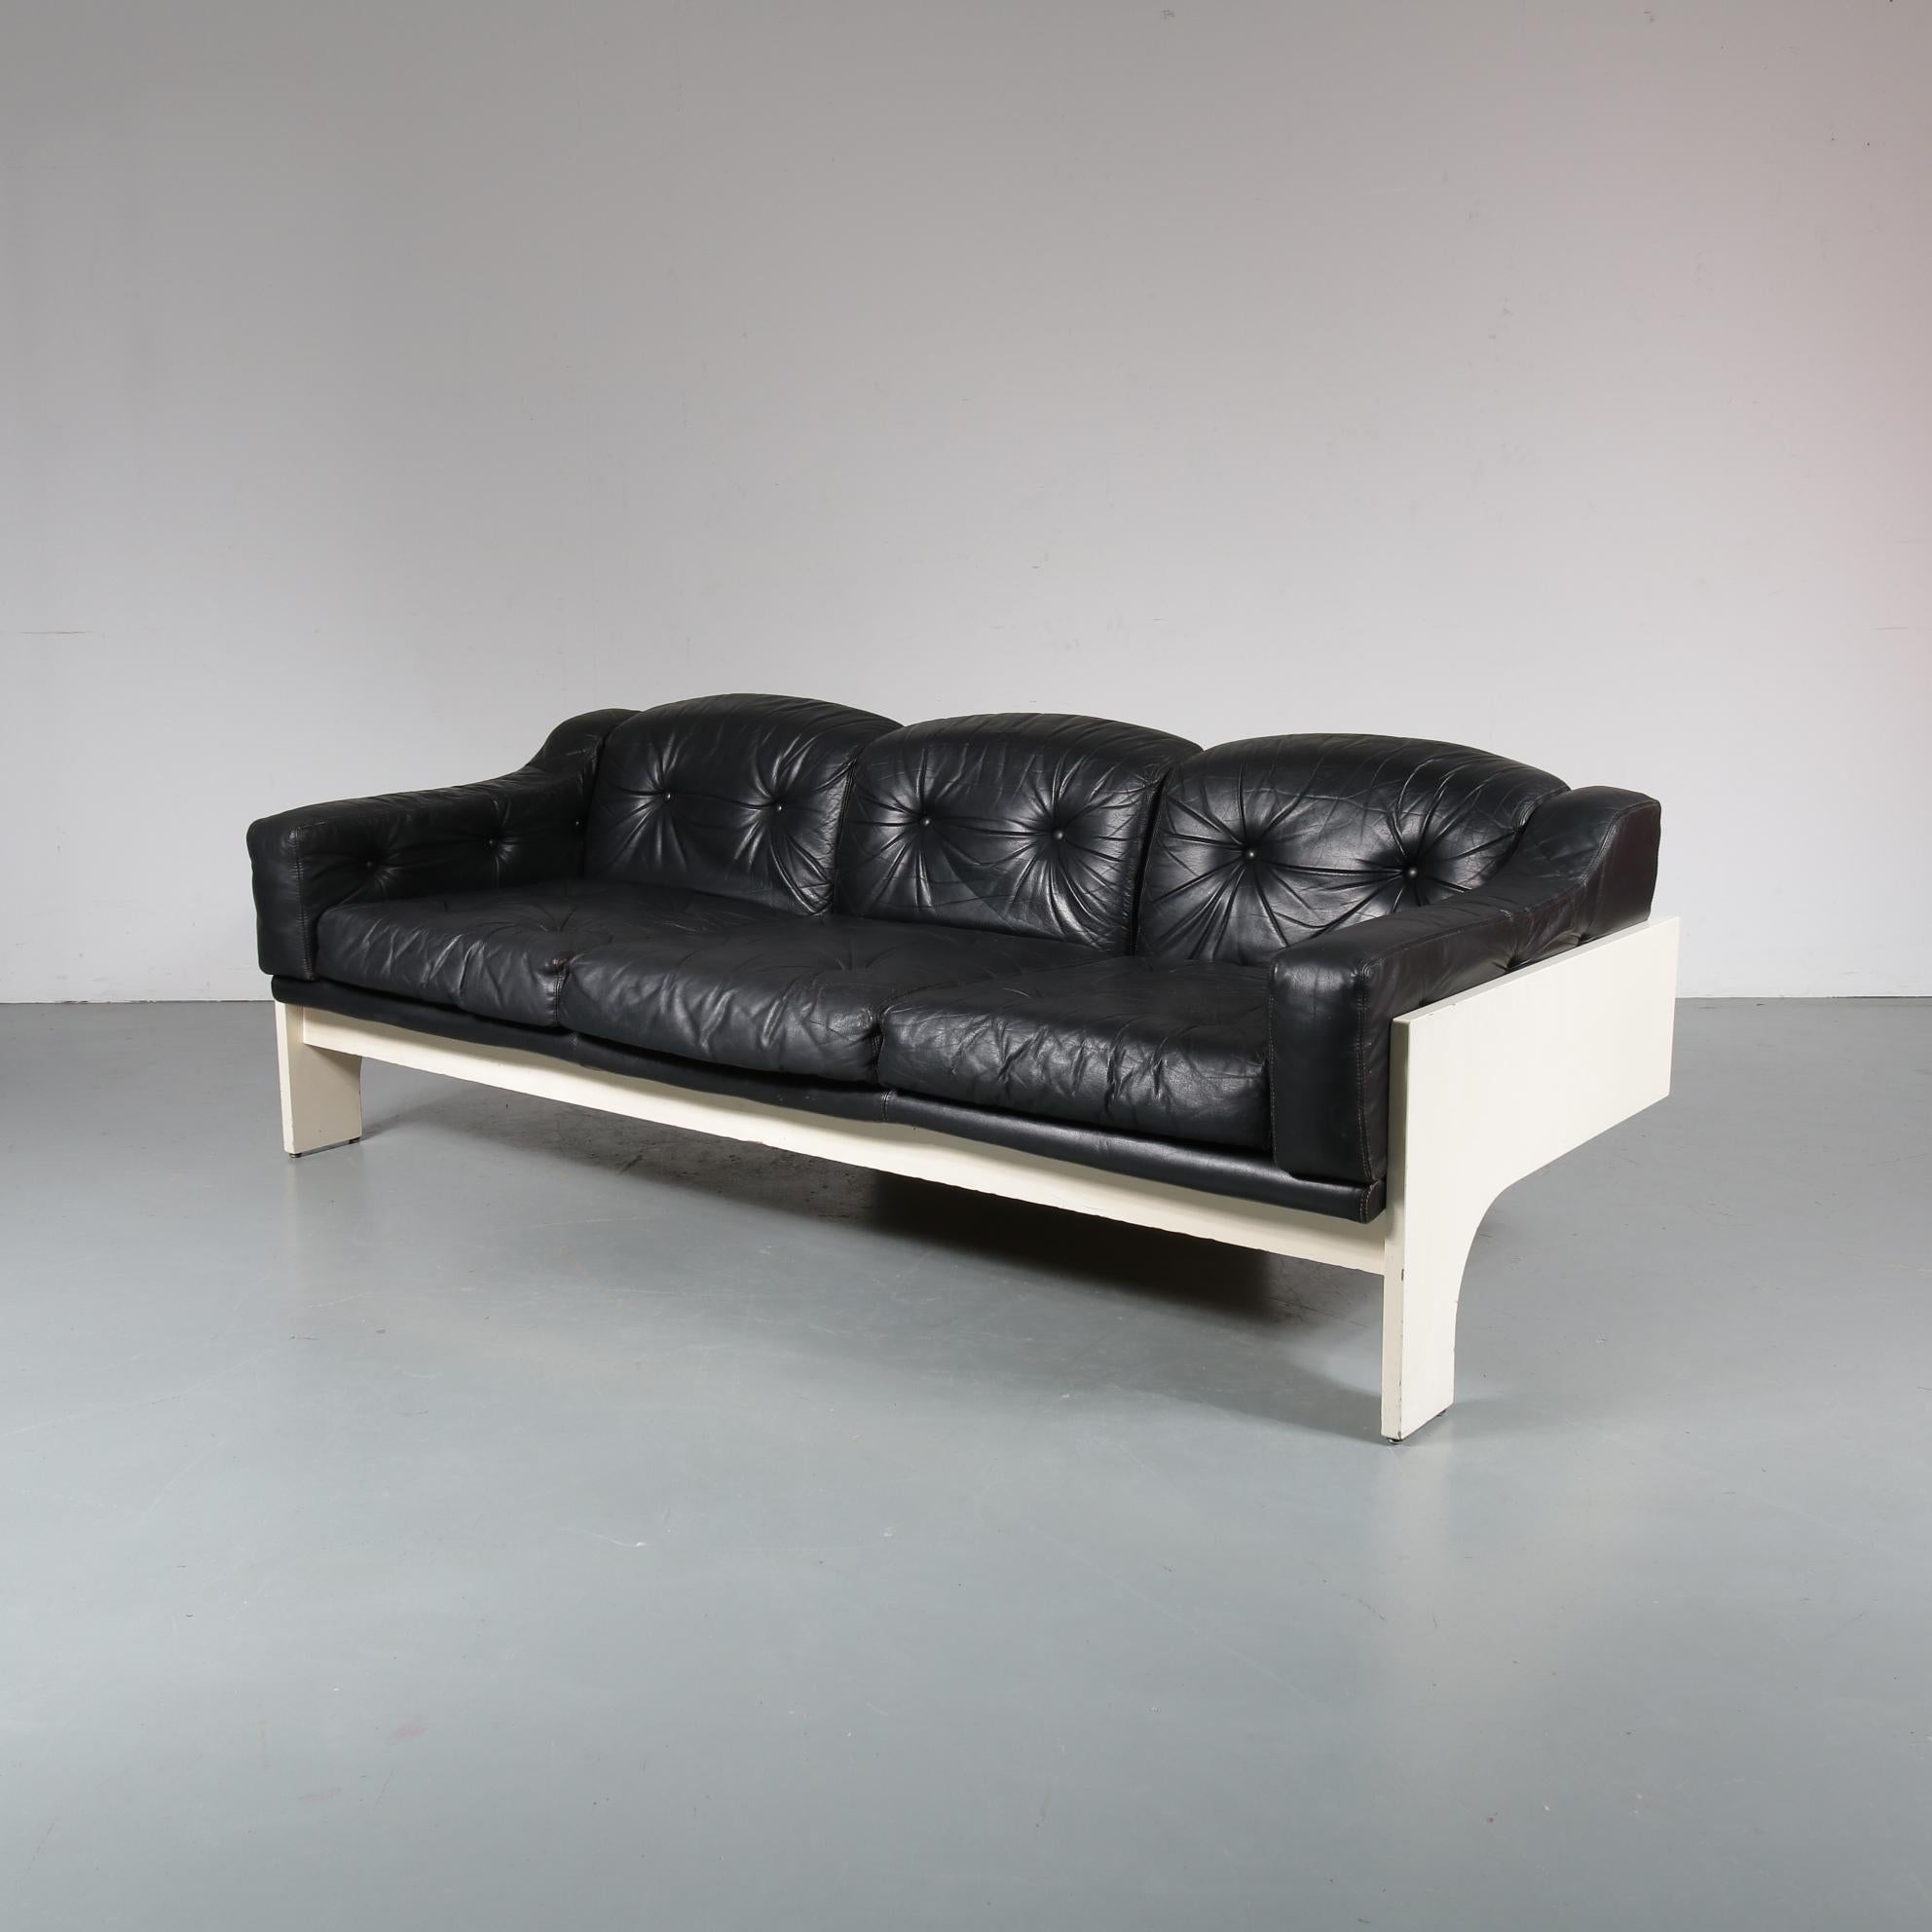 A beautiful sofa, model Oriolo, designed by Claudio Salocchi and manufactured by Sormani in Italy in 1966.

The frame of this unique piece is made of white painted wood, in a unique structure that makes the sofa seem to be floating! The cushions